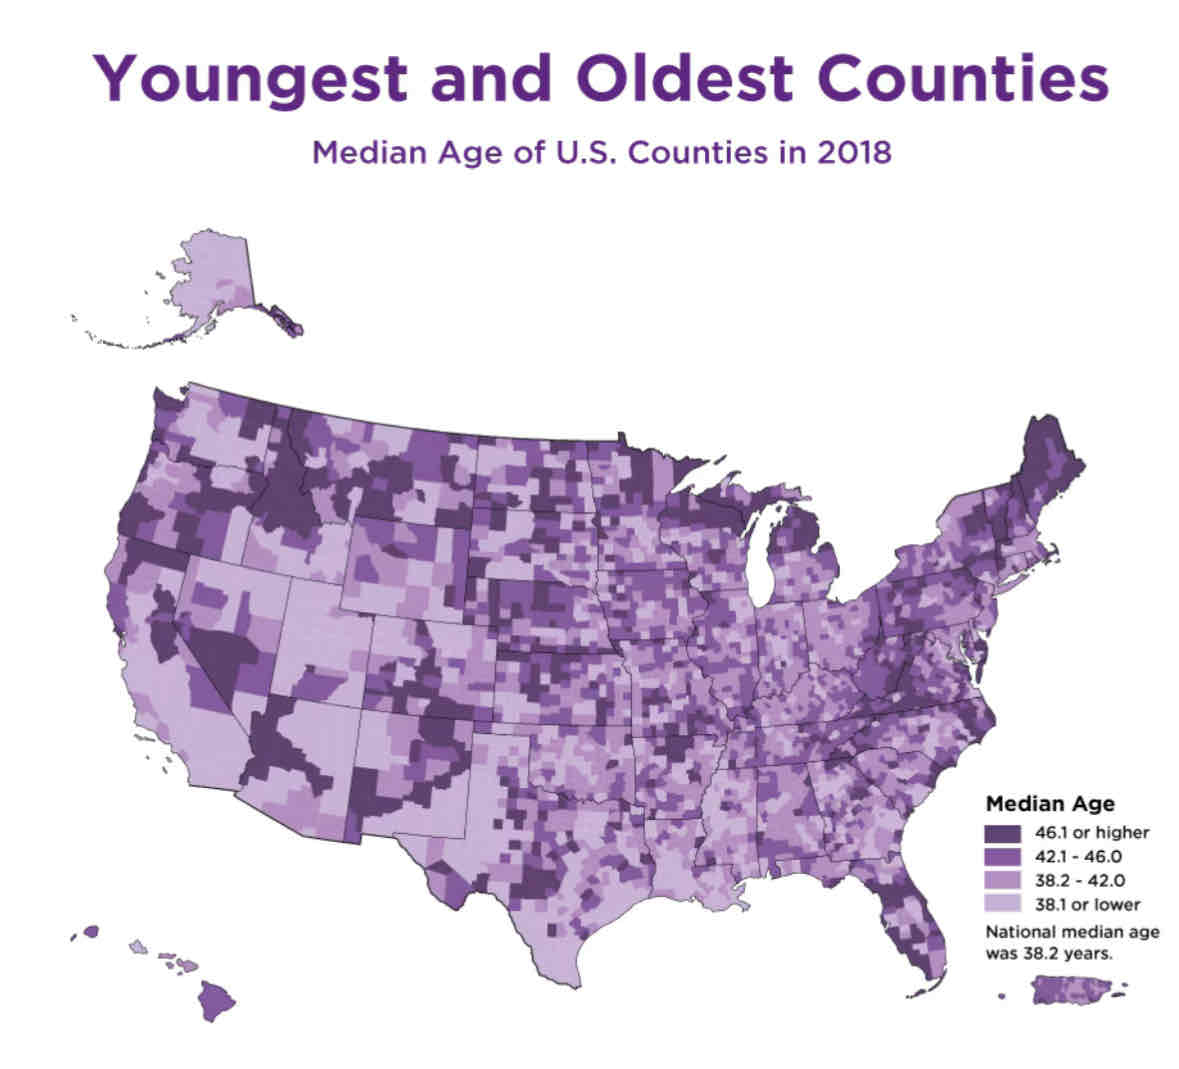 <p>the map below shows the youngest and oldest counties in the United States.which of the following organizations or people could use this information to help them with their situation?</p>